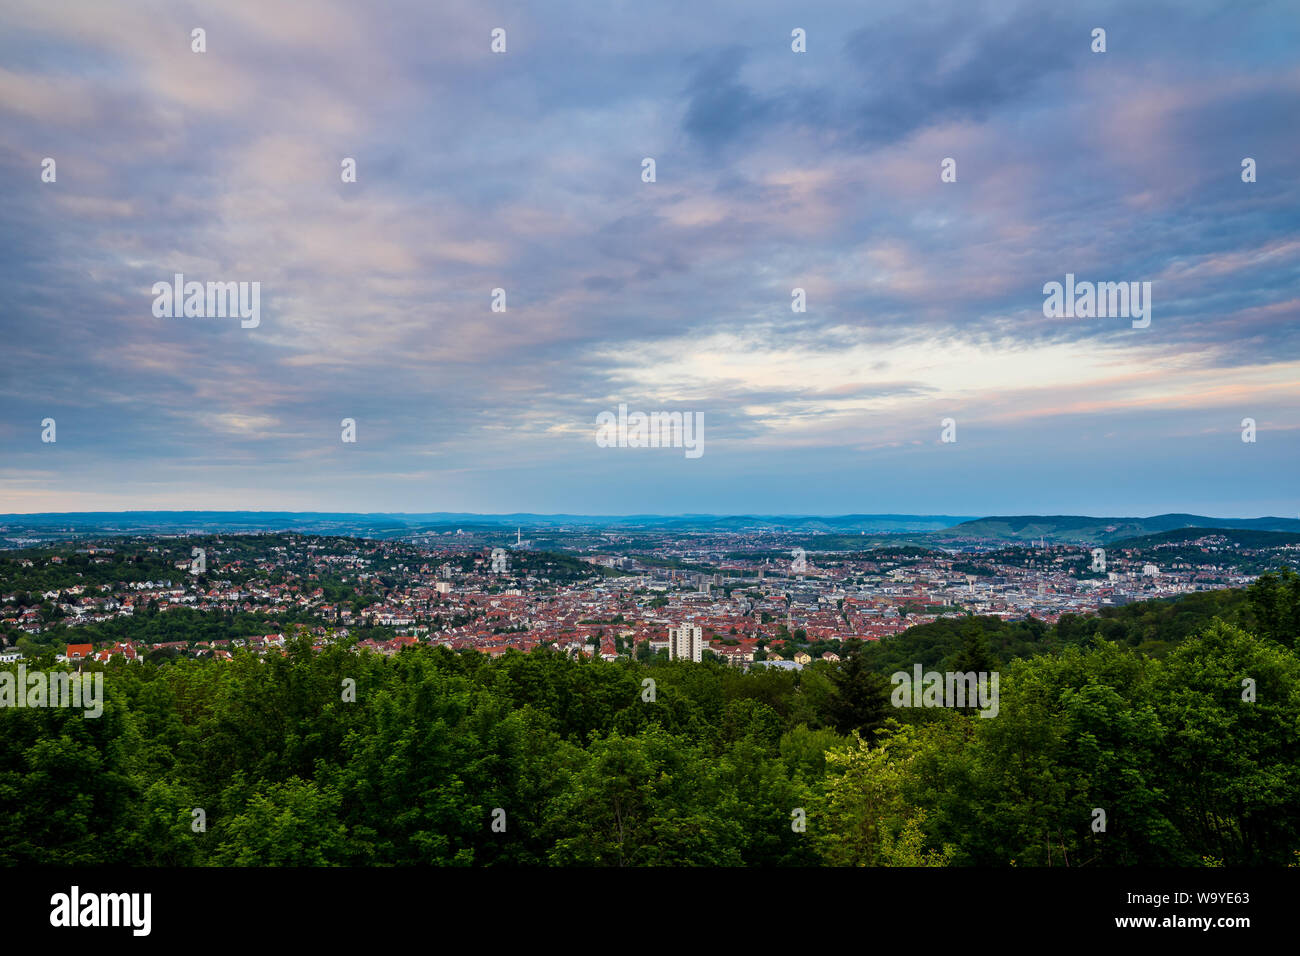 Germany, Stuttgart city metropolis of countless houses and buildings forming skyline in valley from mountain rubble at sunset Stock Photo